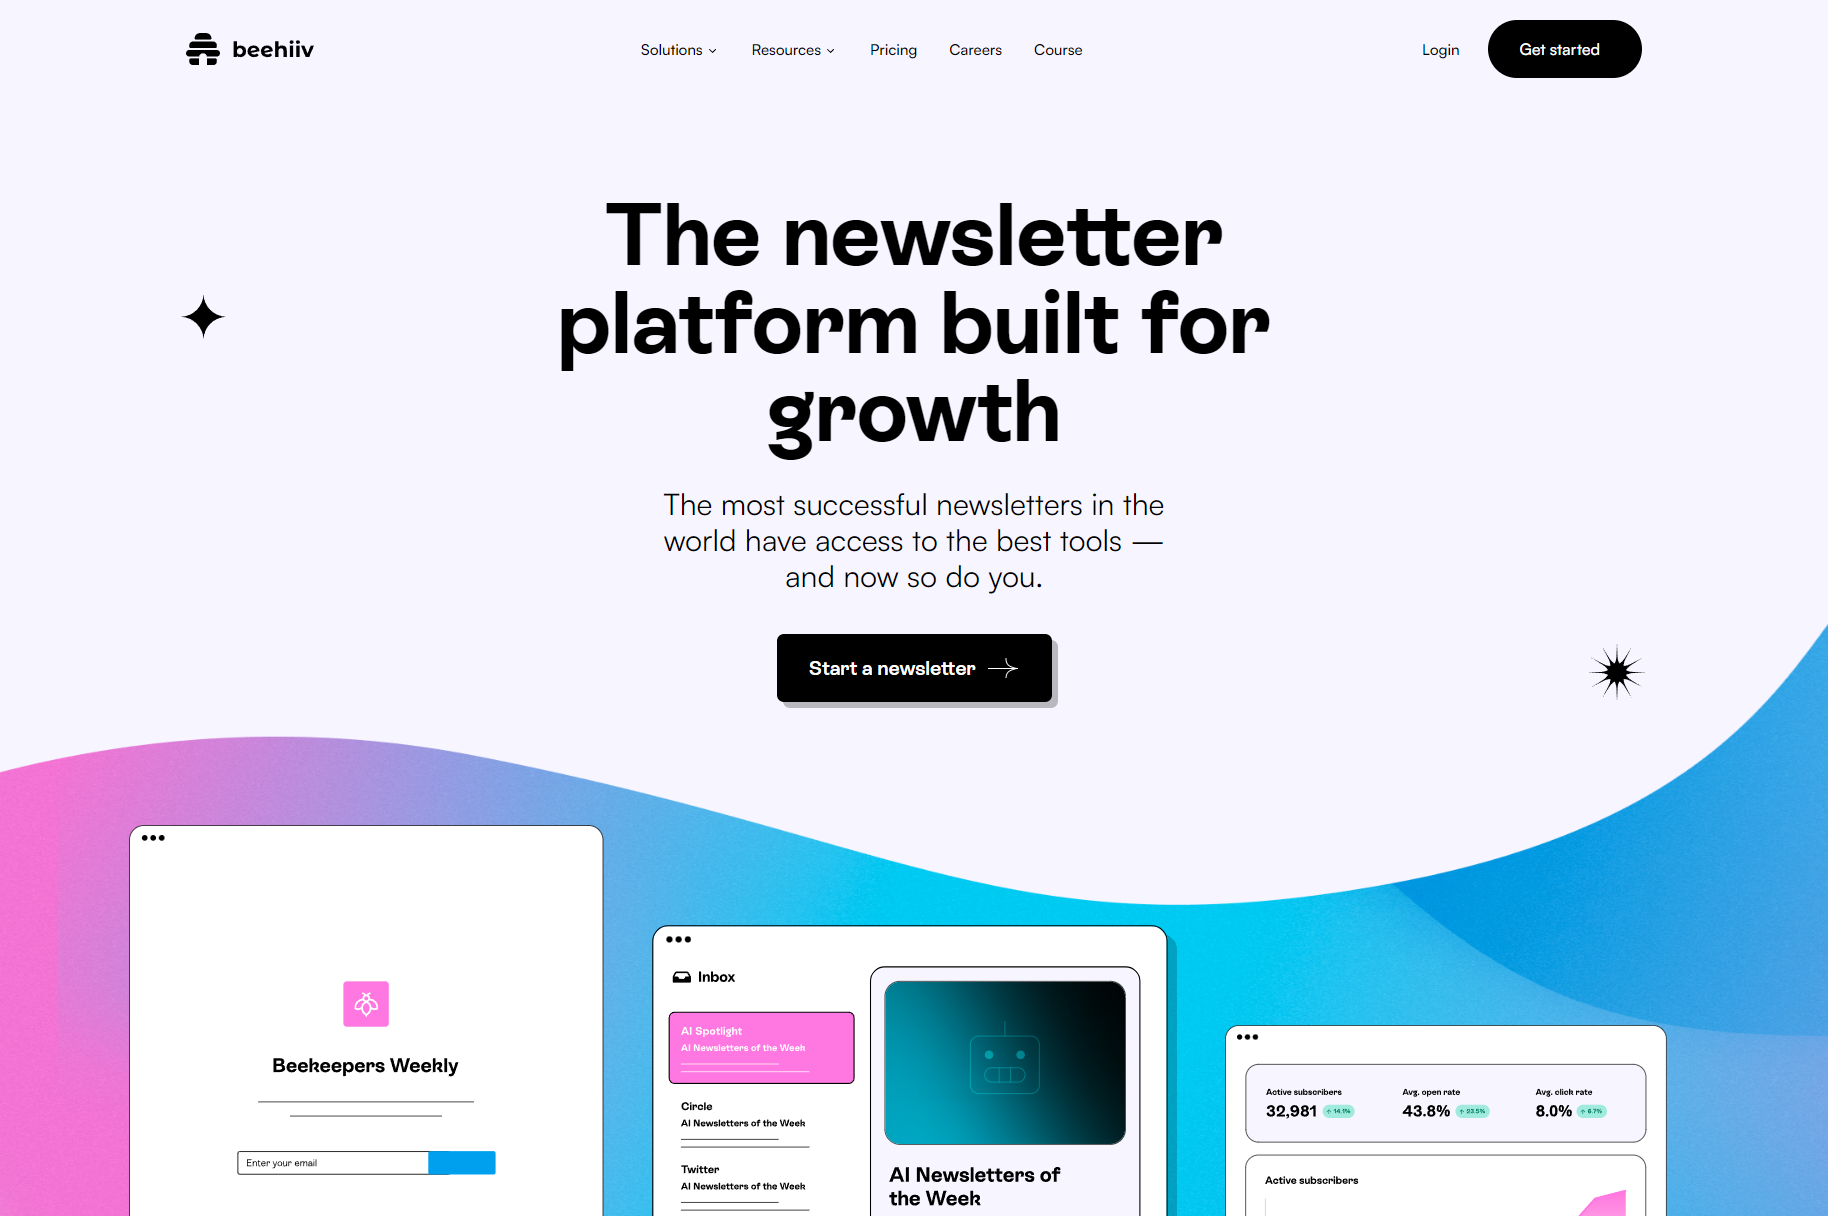 Beehiv is a newsletter platform designed for growth.